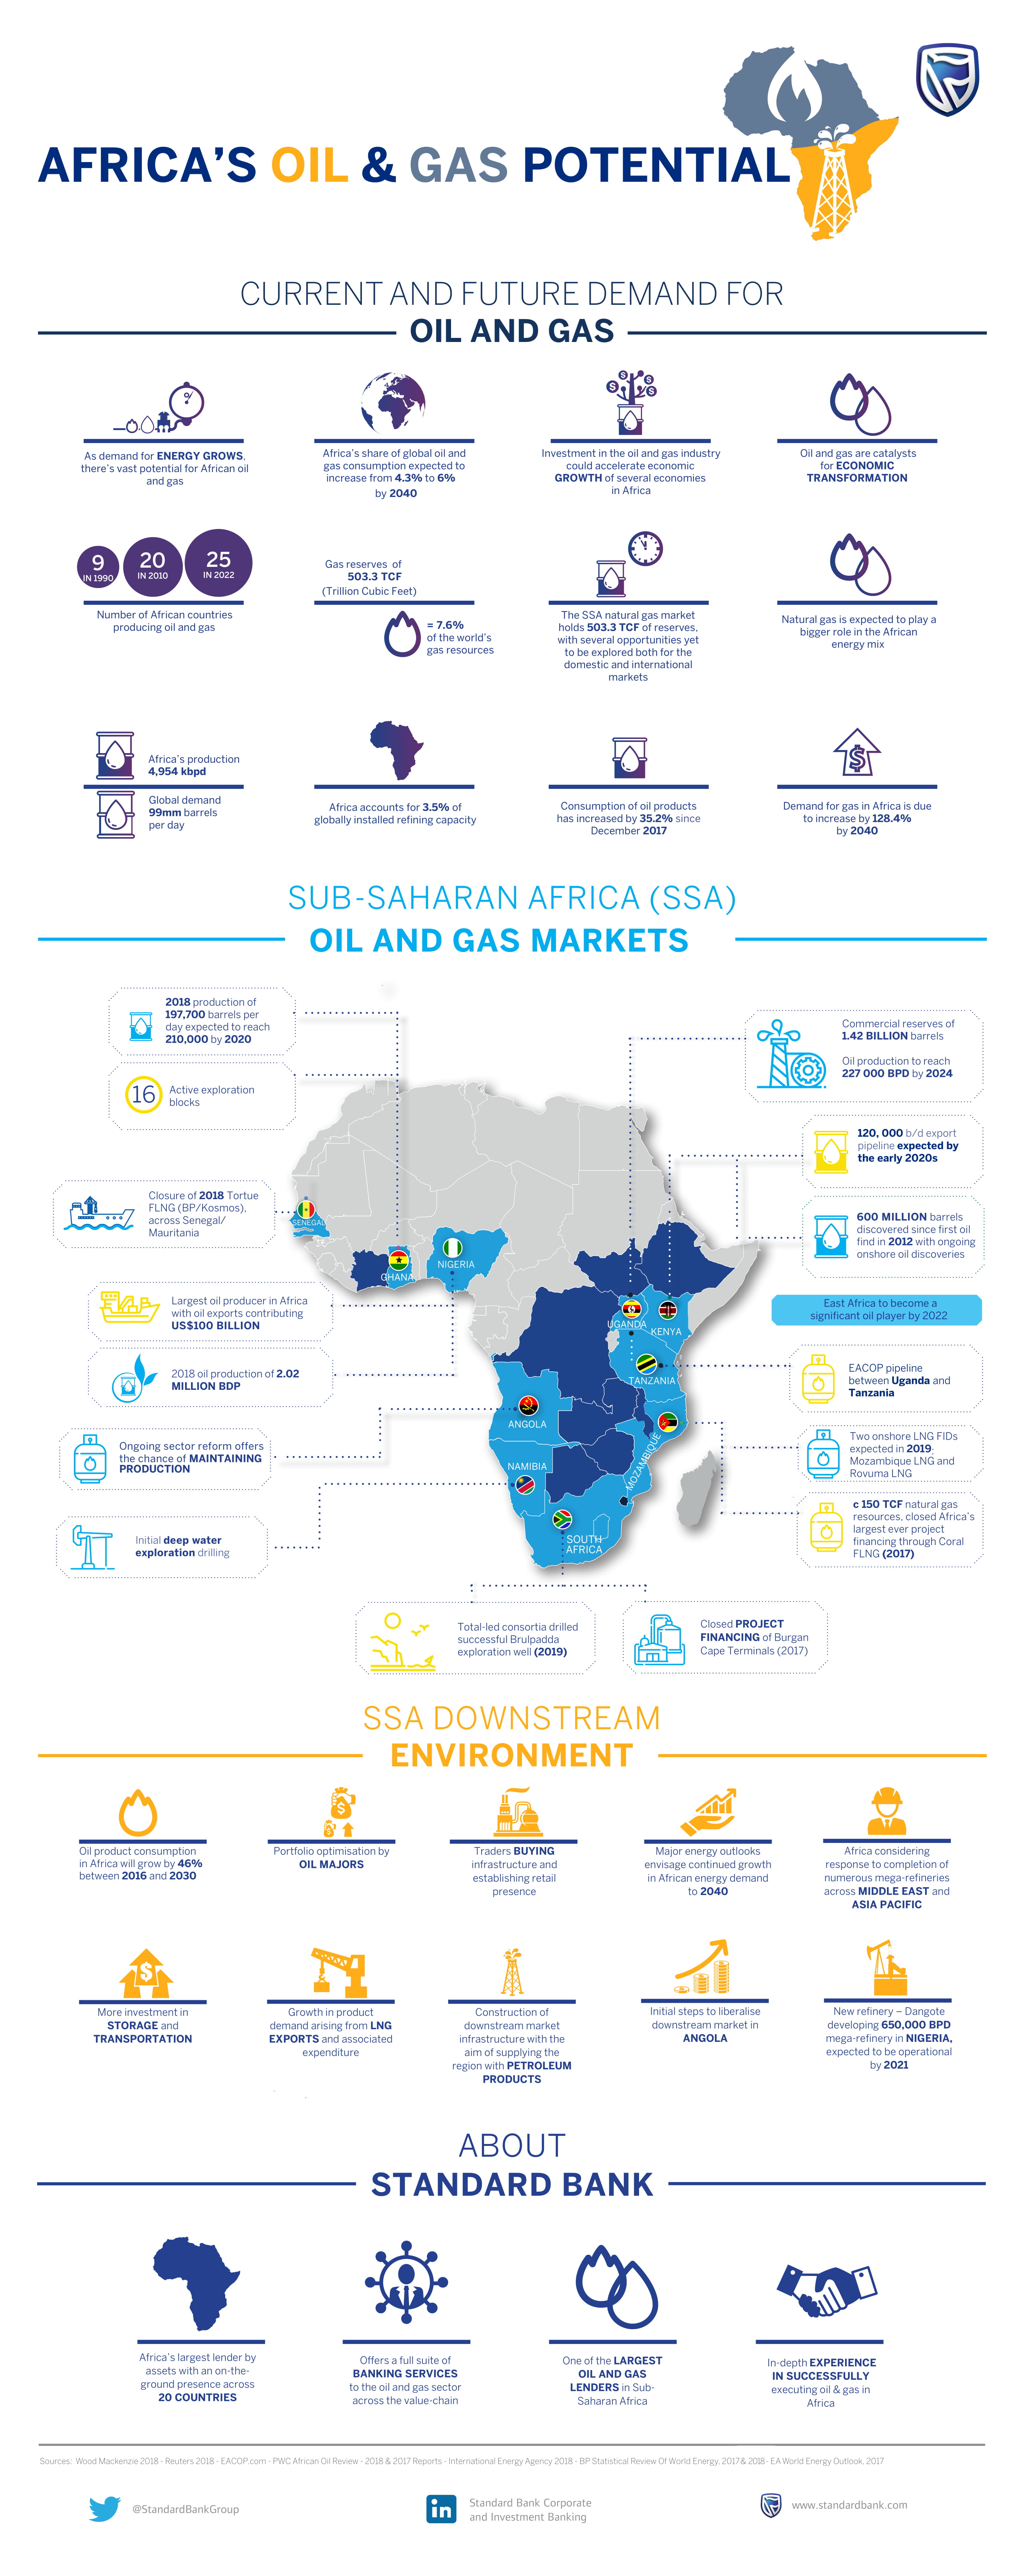 Africa's Oil and Gas potential